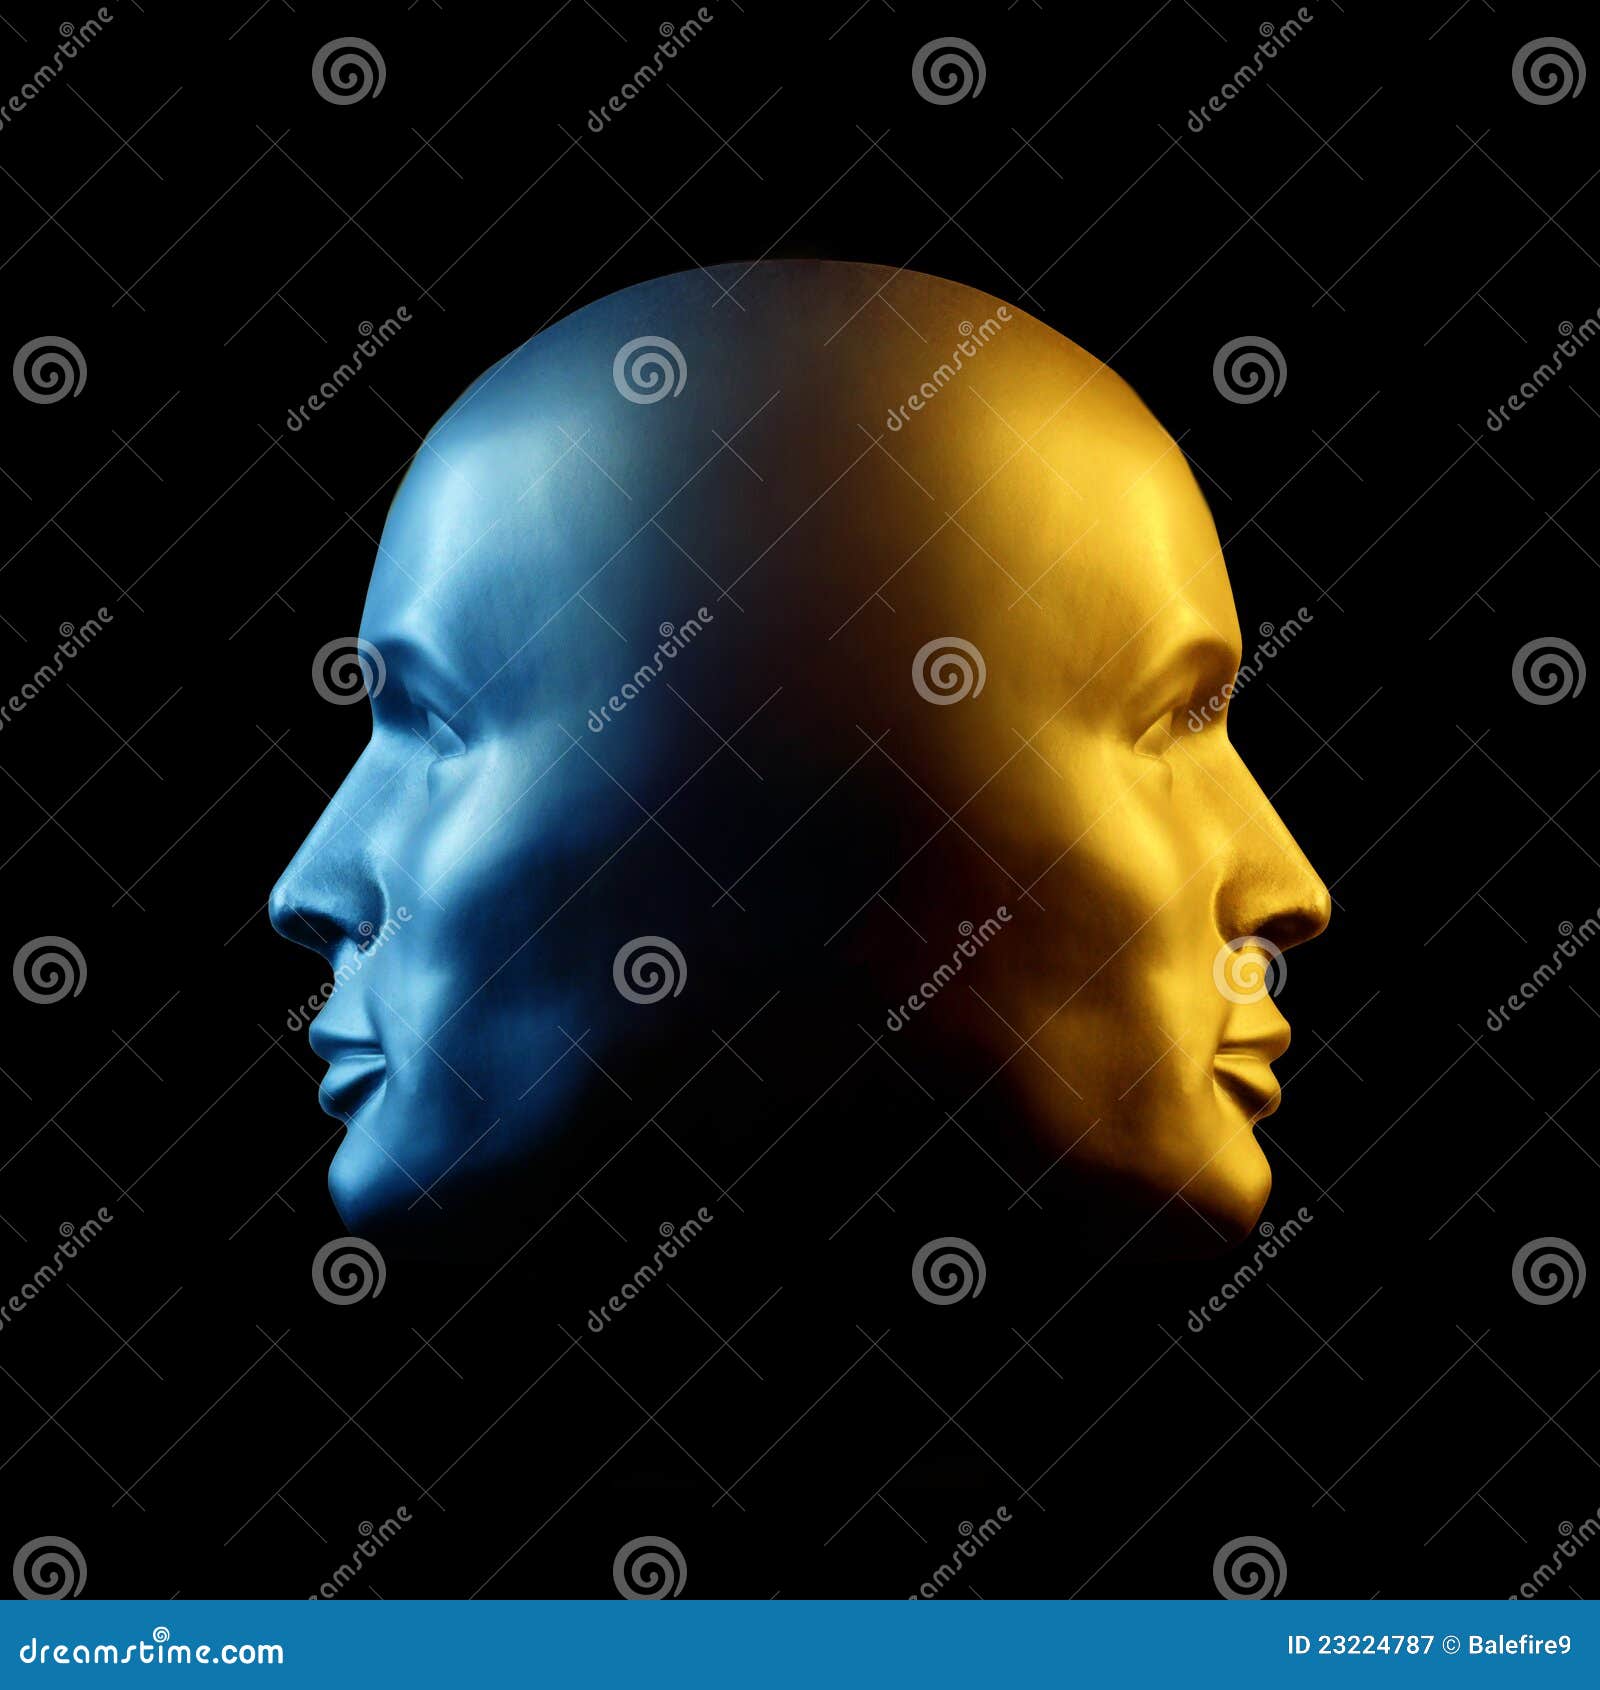 two-faced head statue, blue and gold